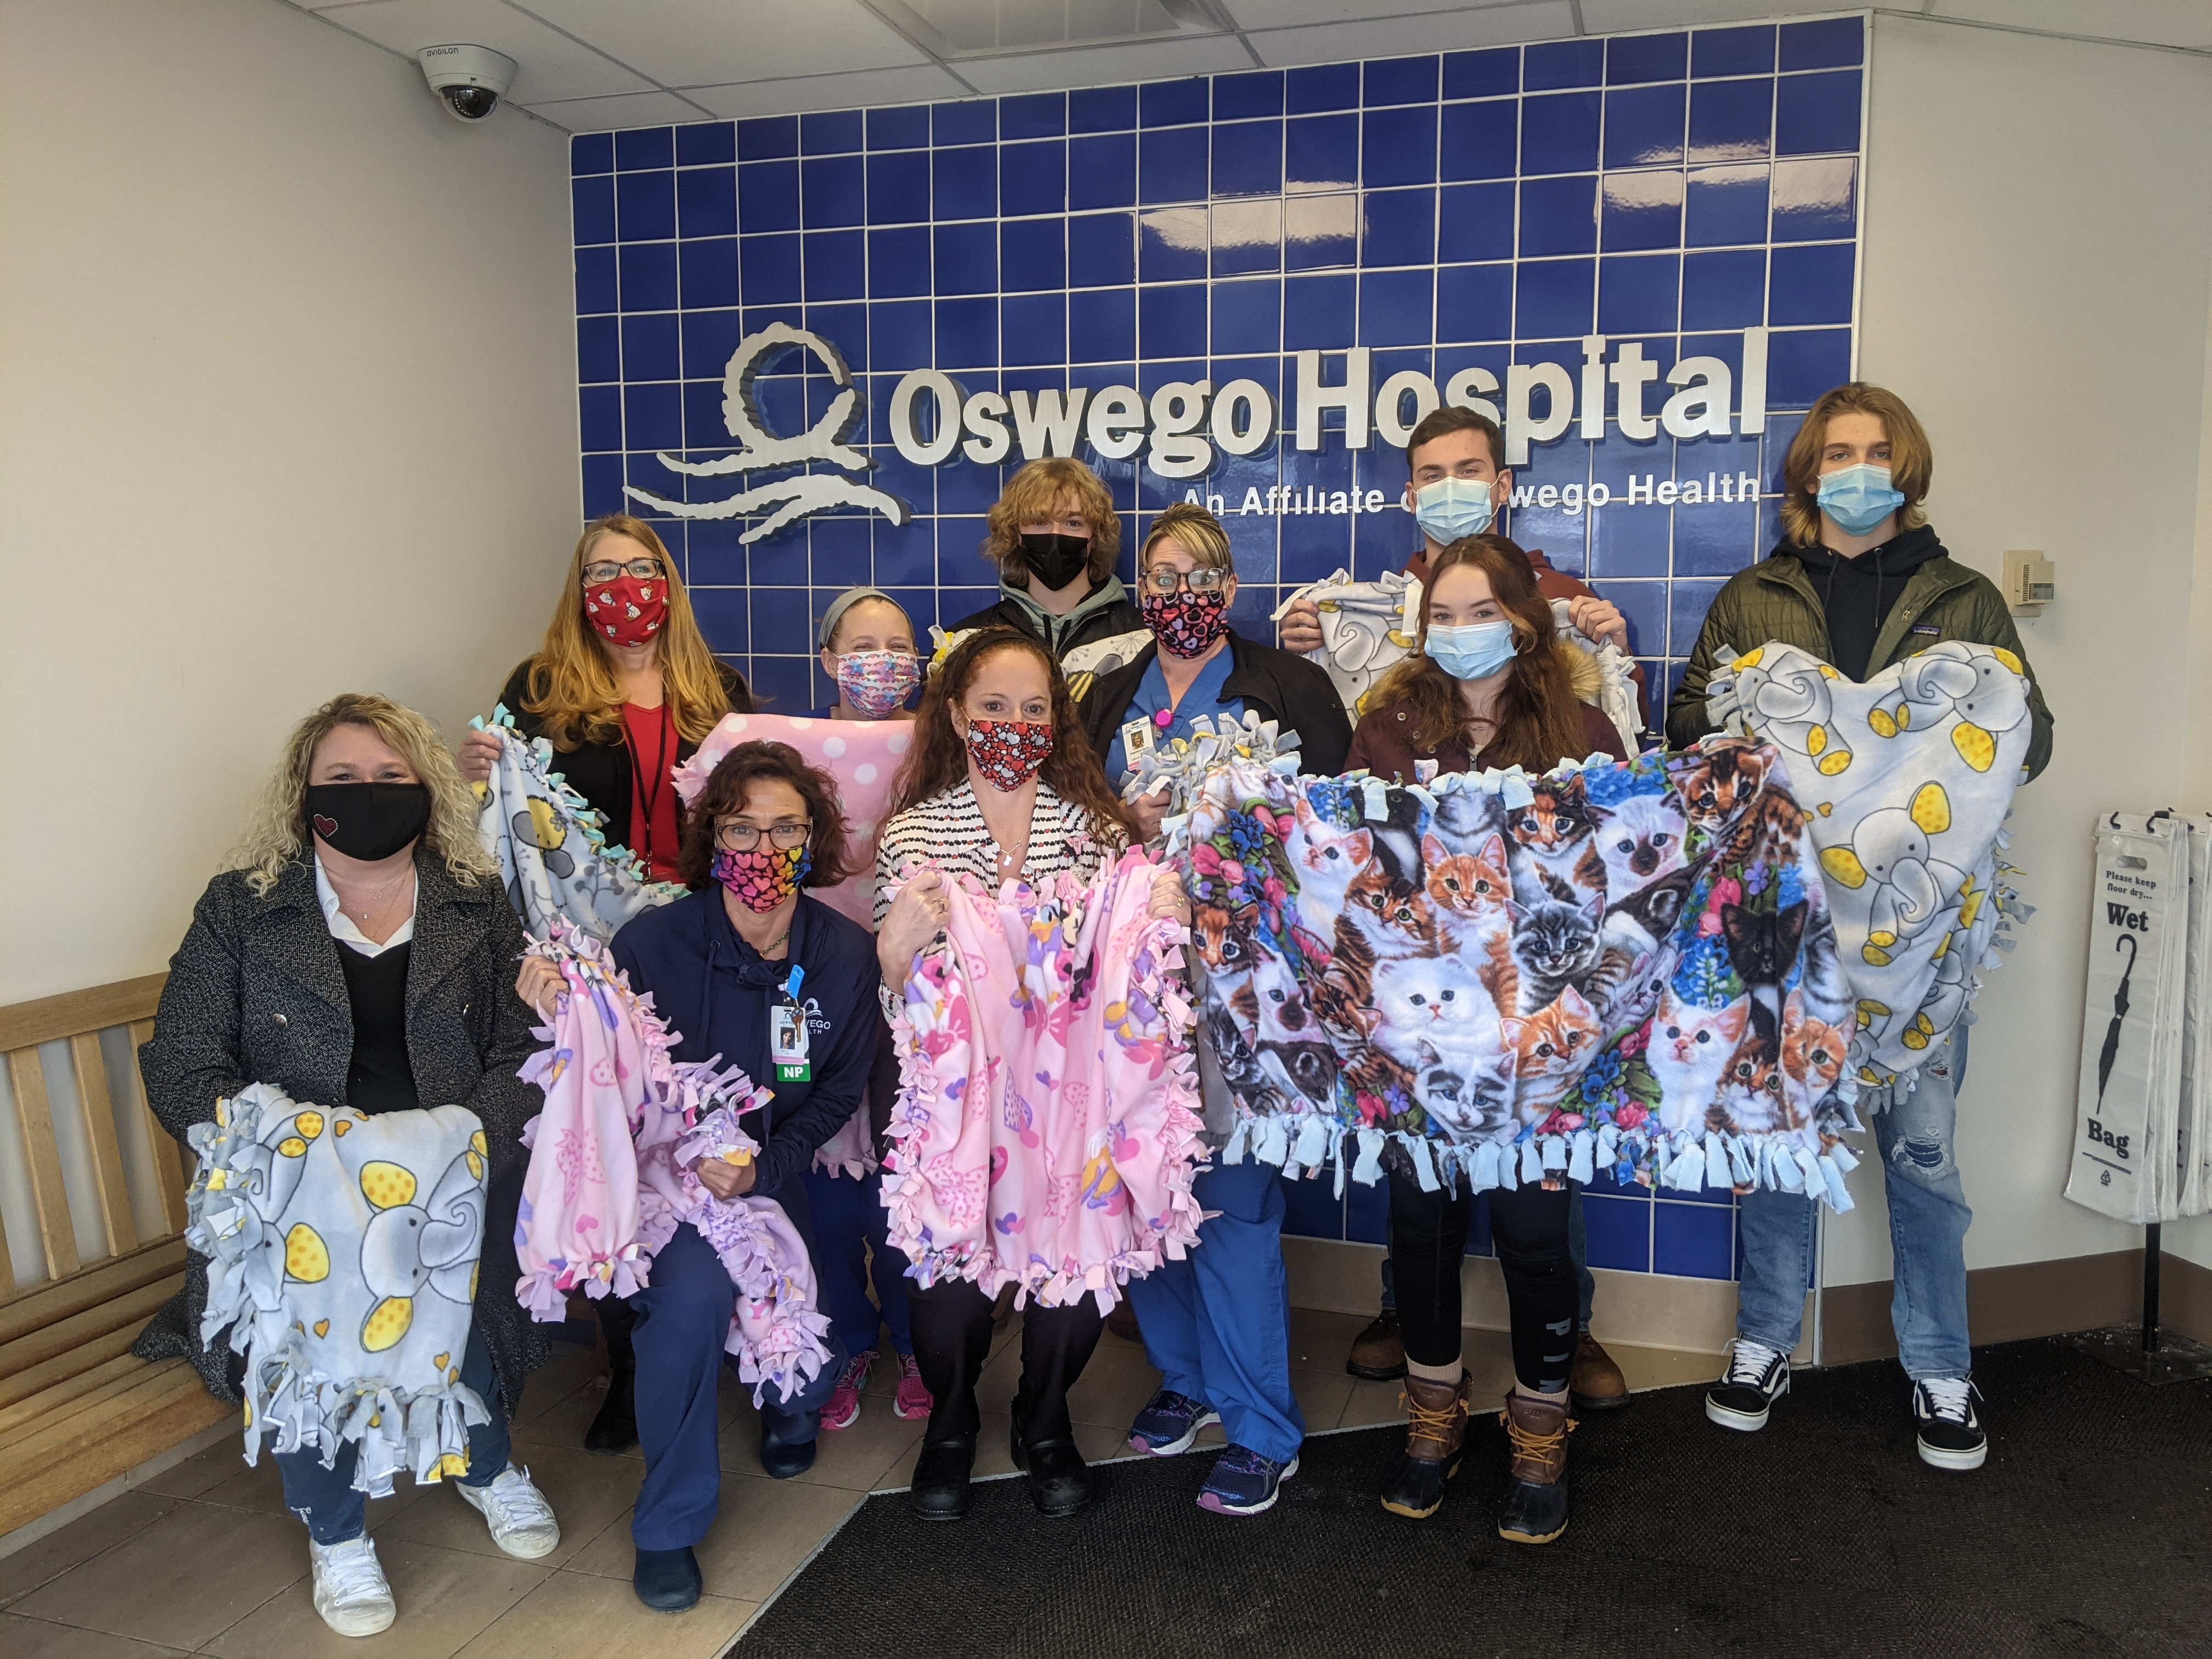 Several members from the Oswego High School Interact Club present a donation of 24 blankets to the maternity ward staff at Oswego Hospital